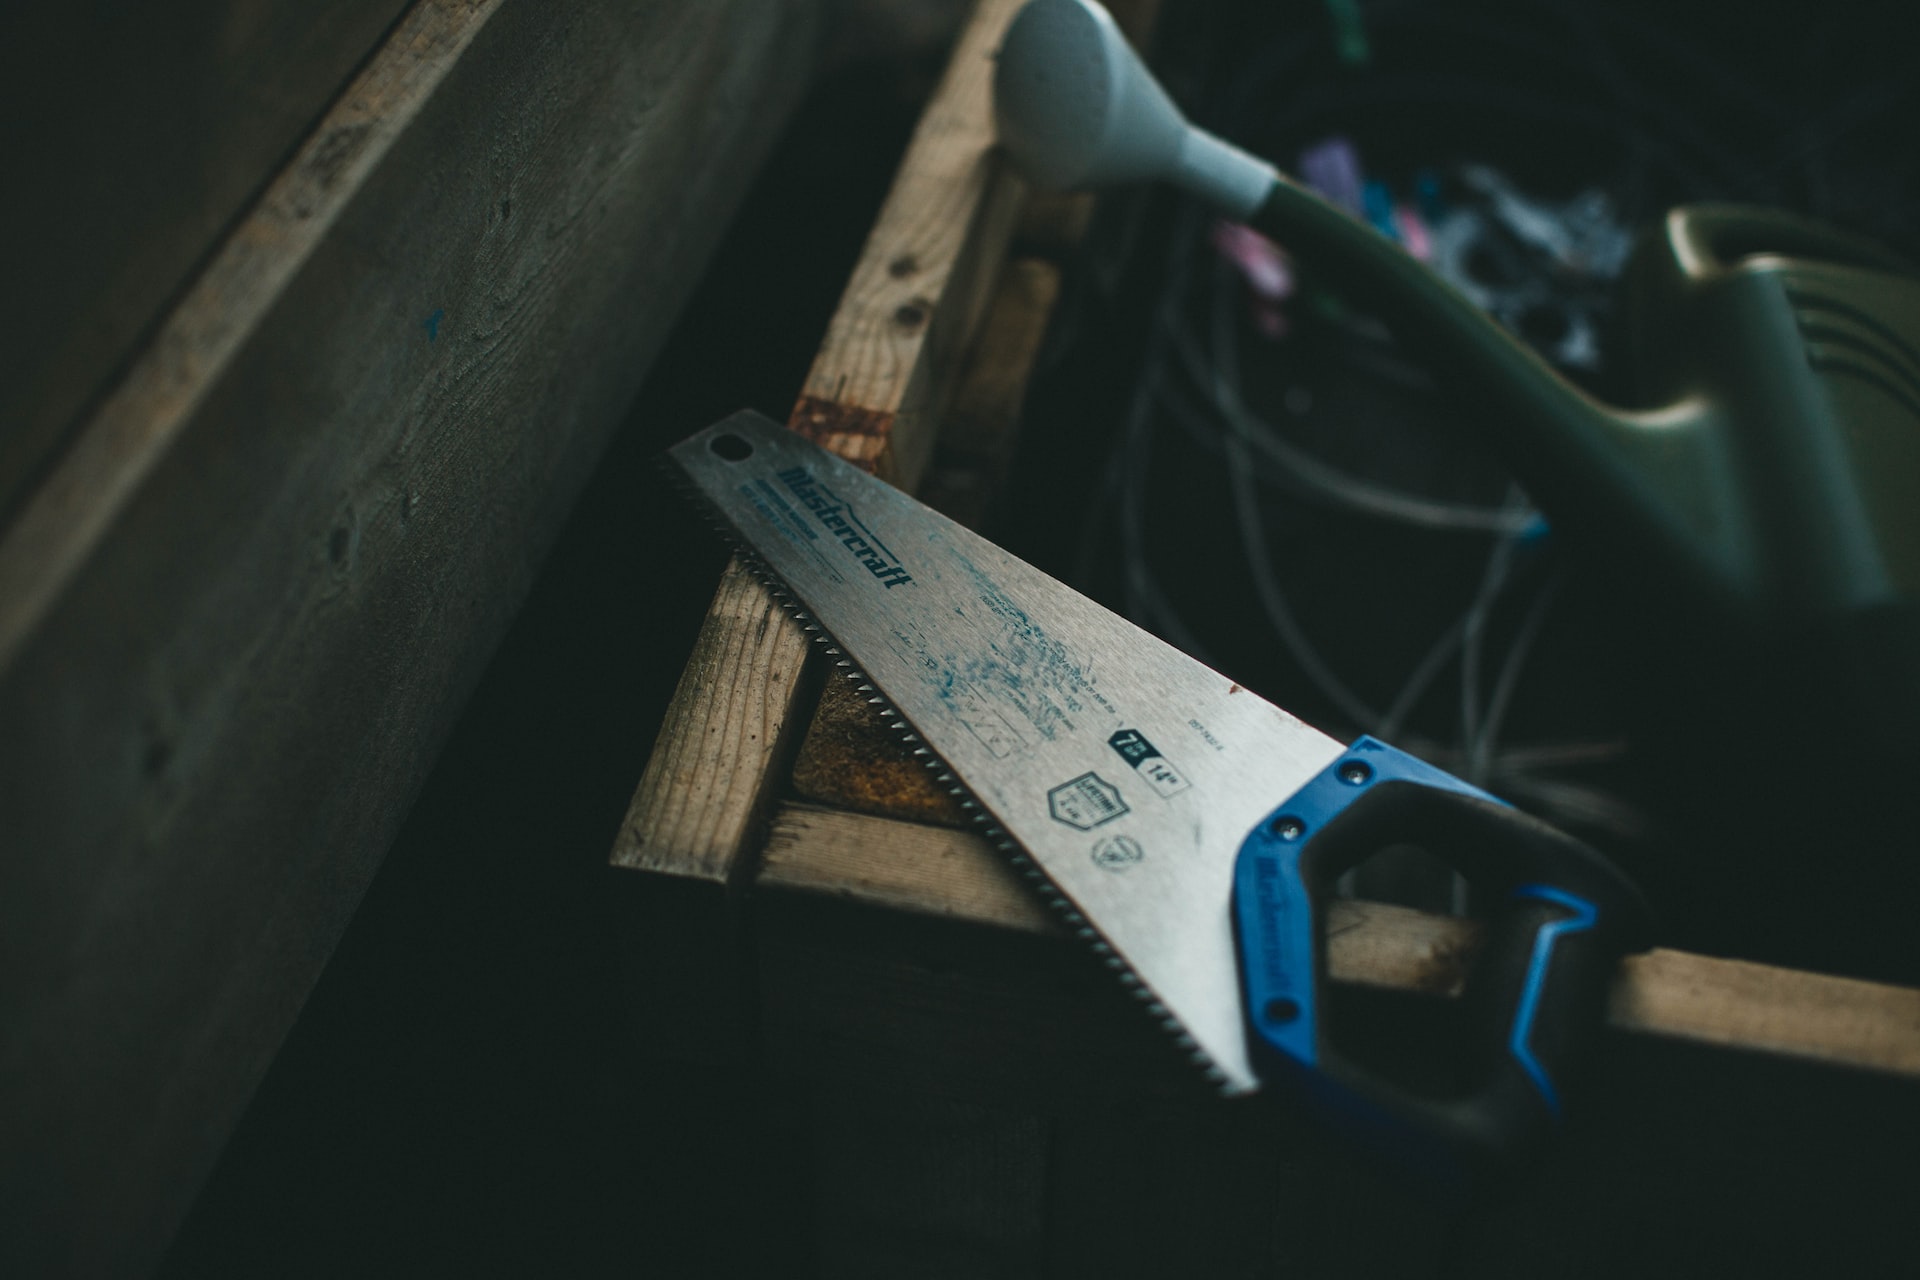 A blue hand saw for woodworking